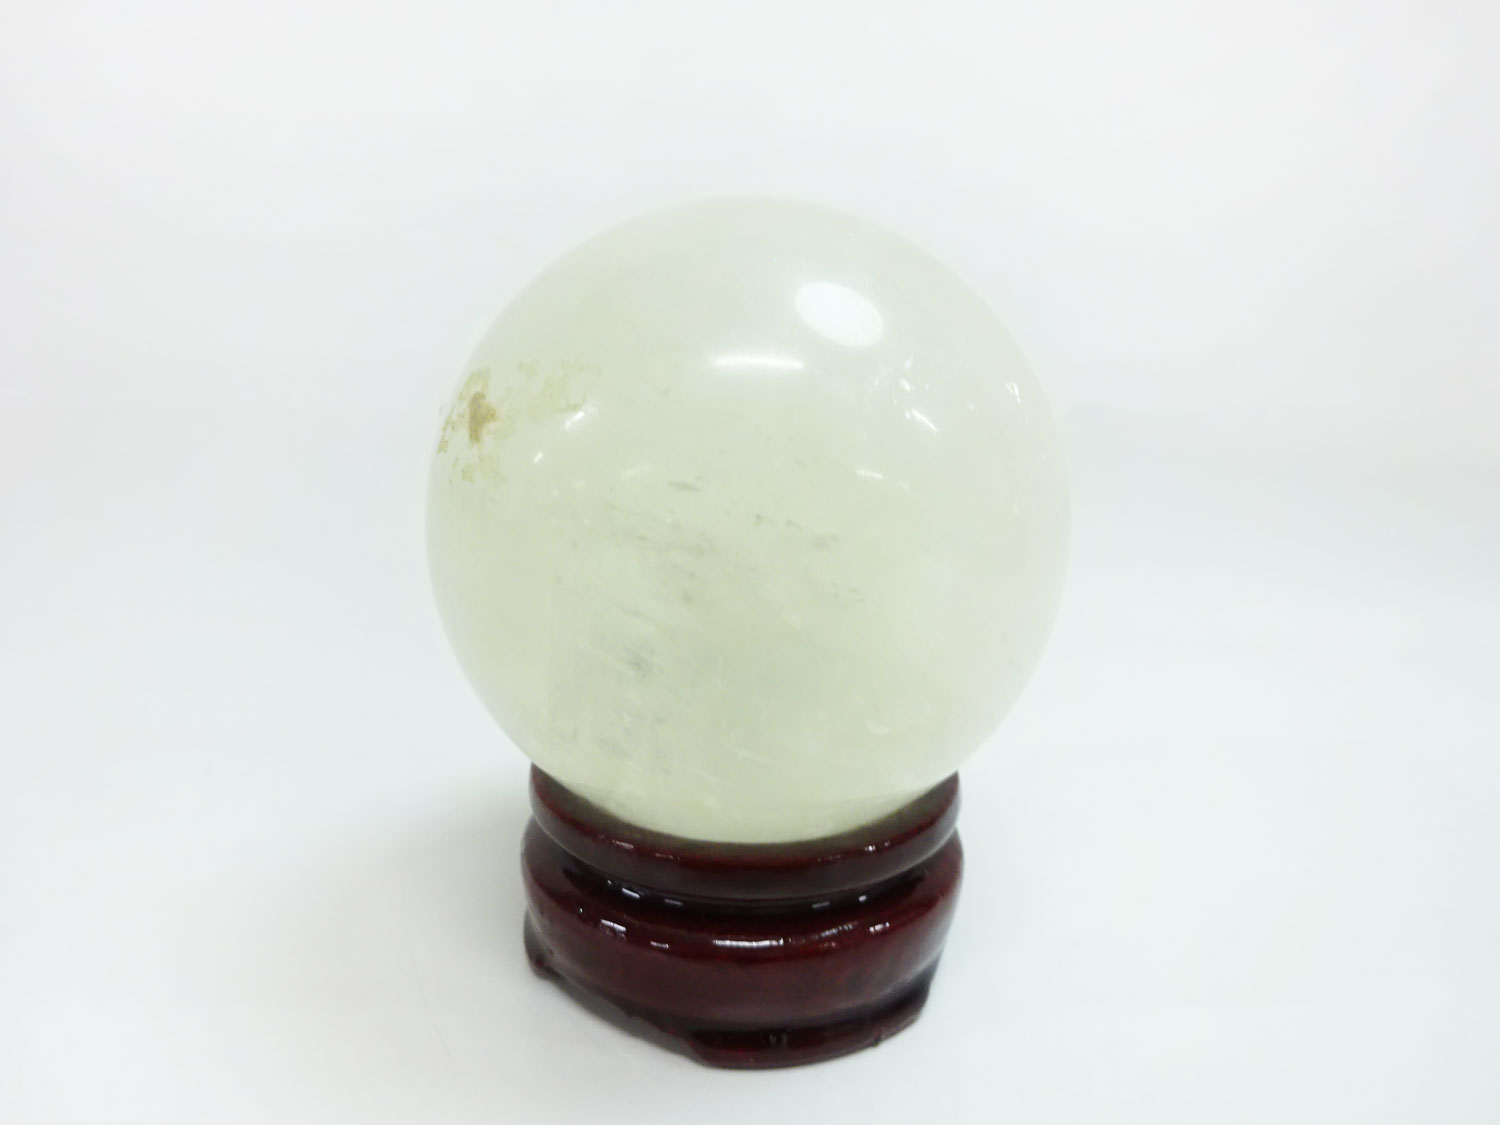 JAPANESE ORNAMENT / NATURAL CRYSTAL & MINERAL (468.71g) / HEALING CRYSTAL SPHERE